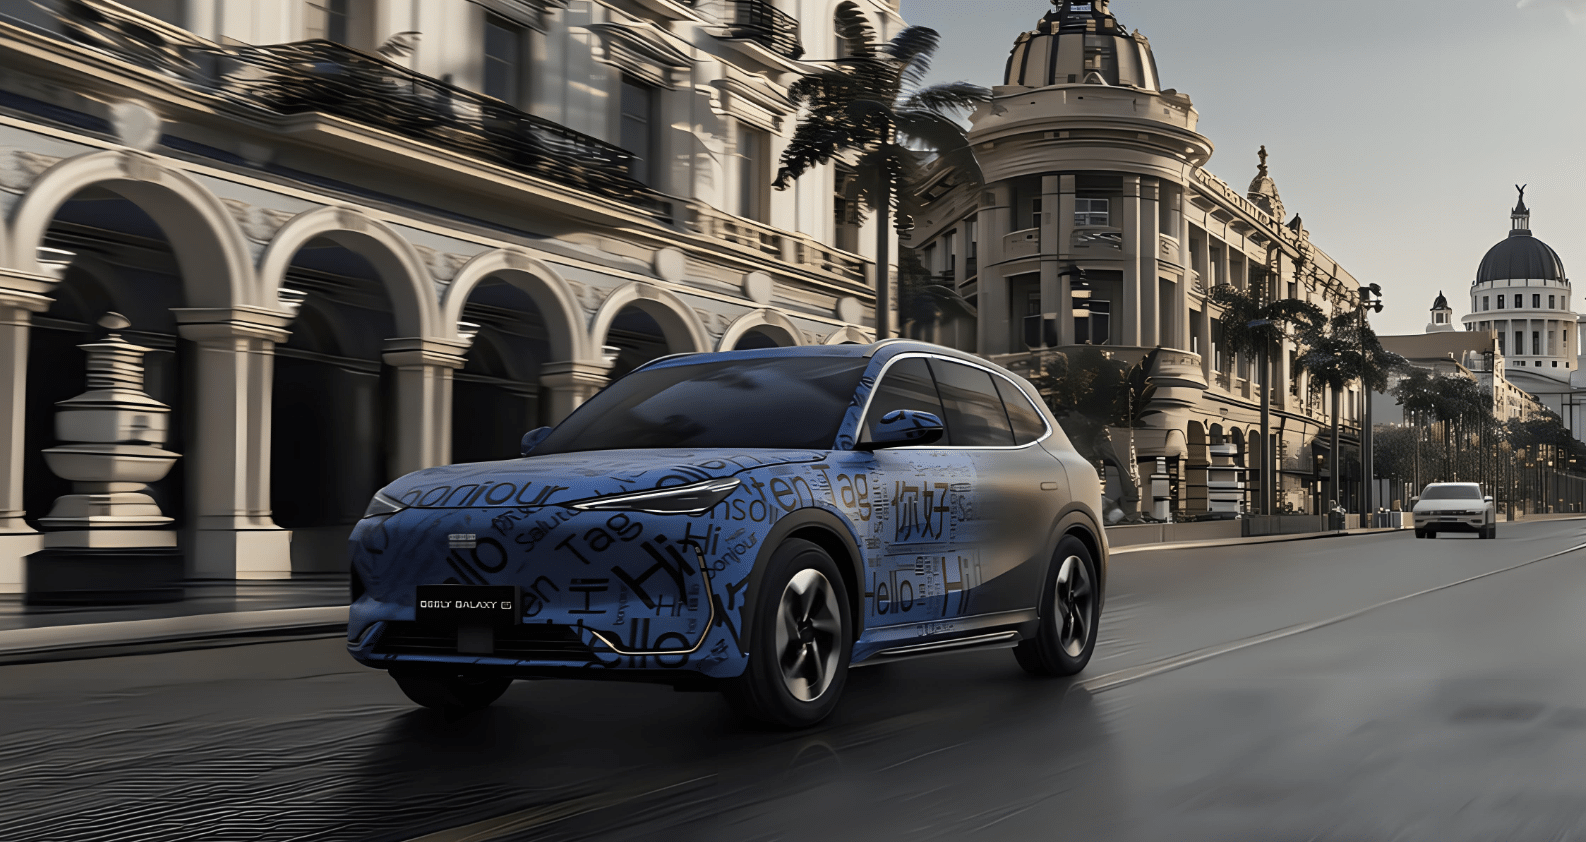 Geely Galaxy unveils new electric SUV, the E5